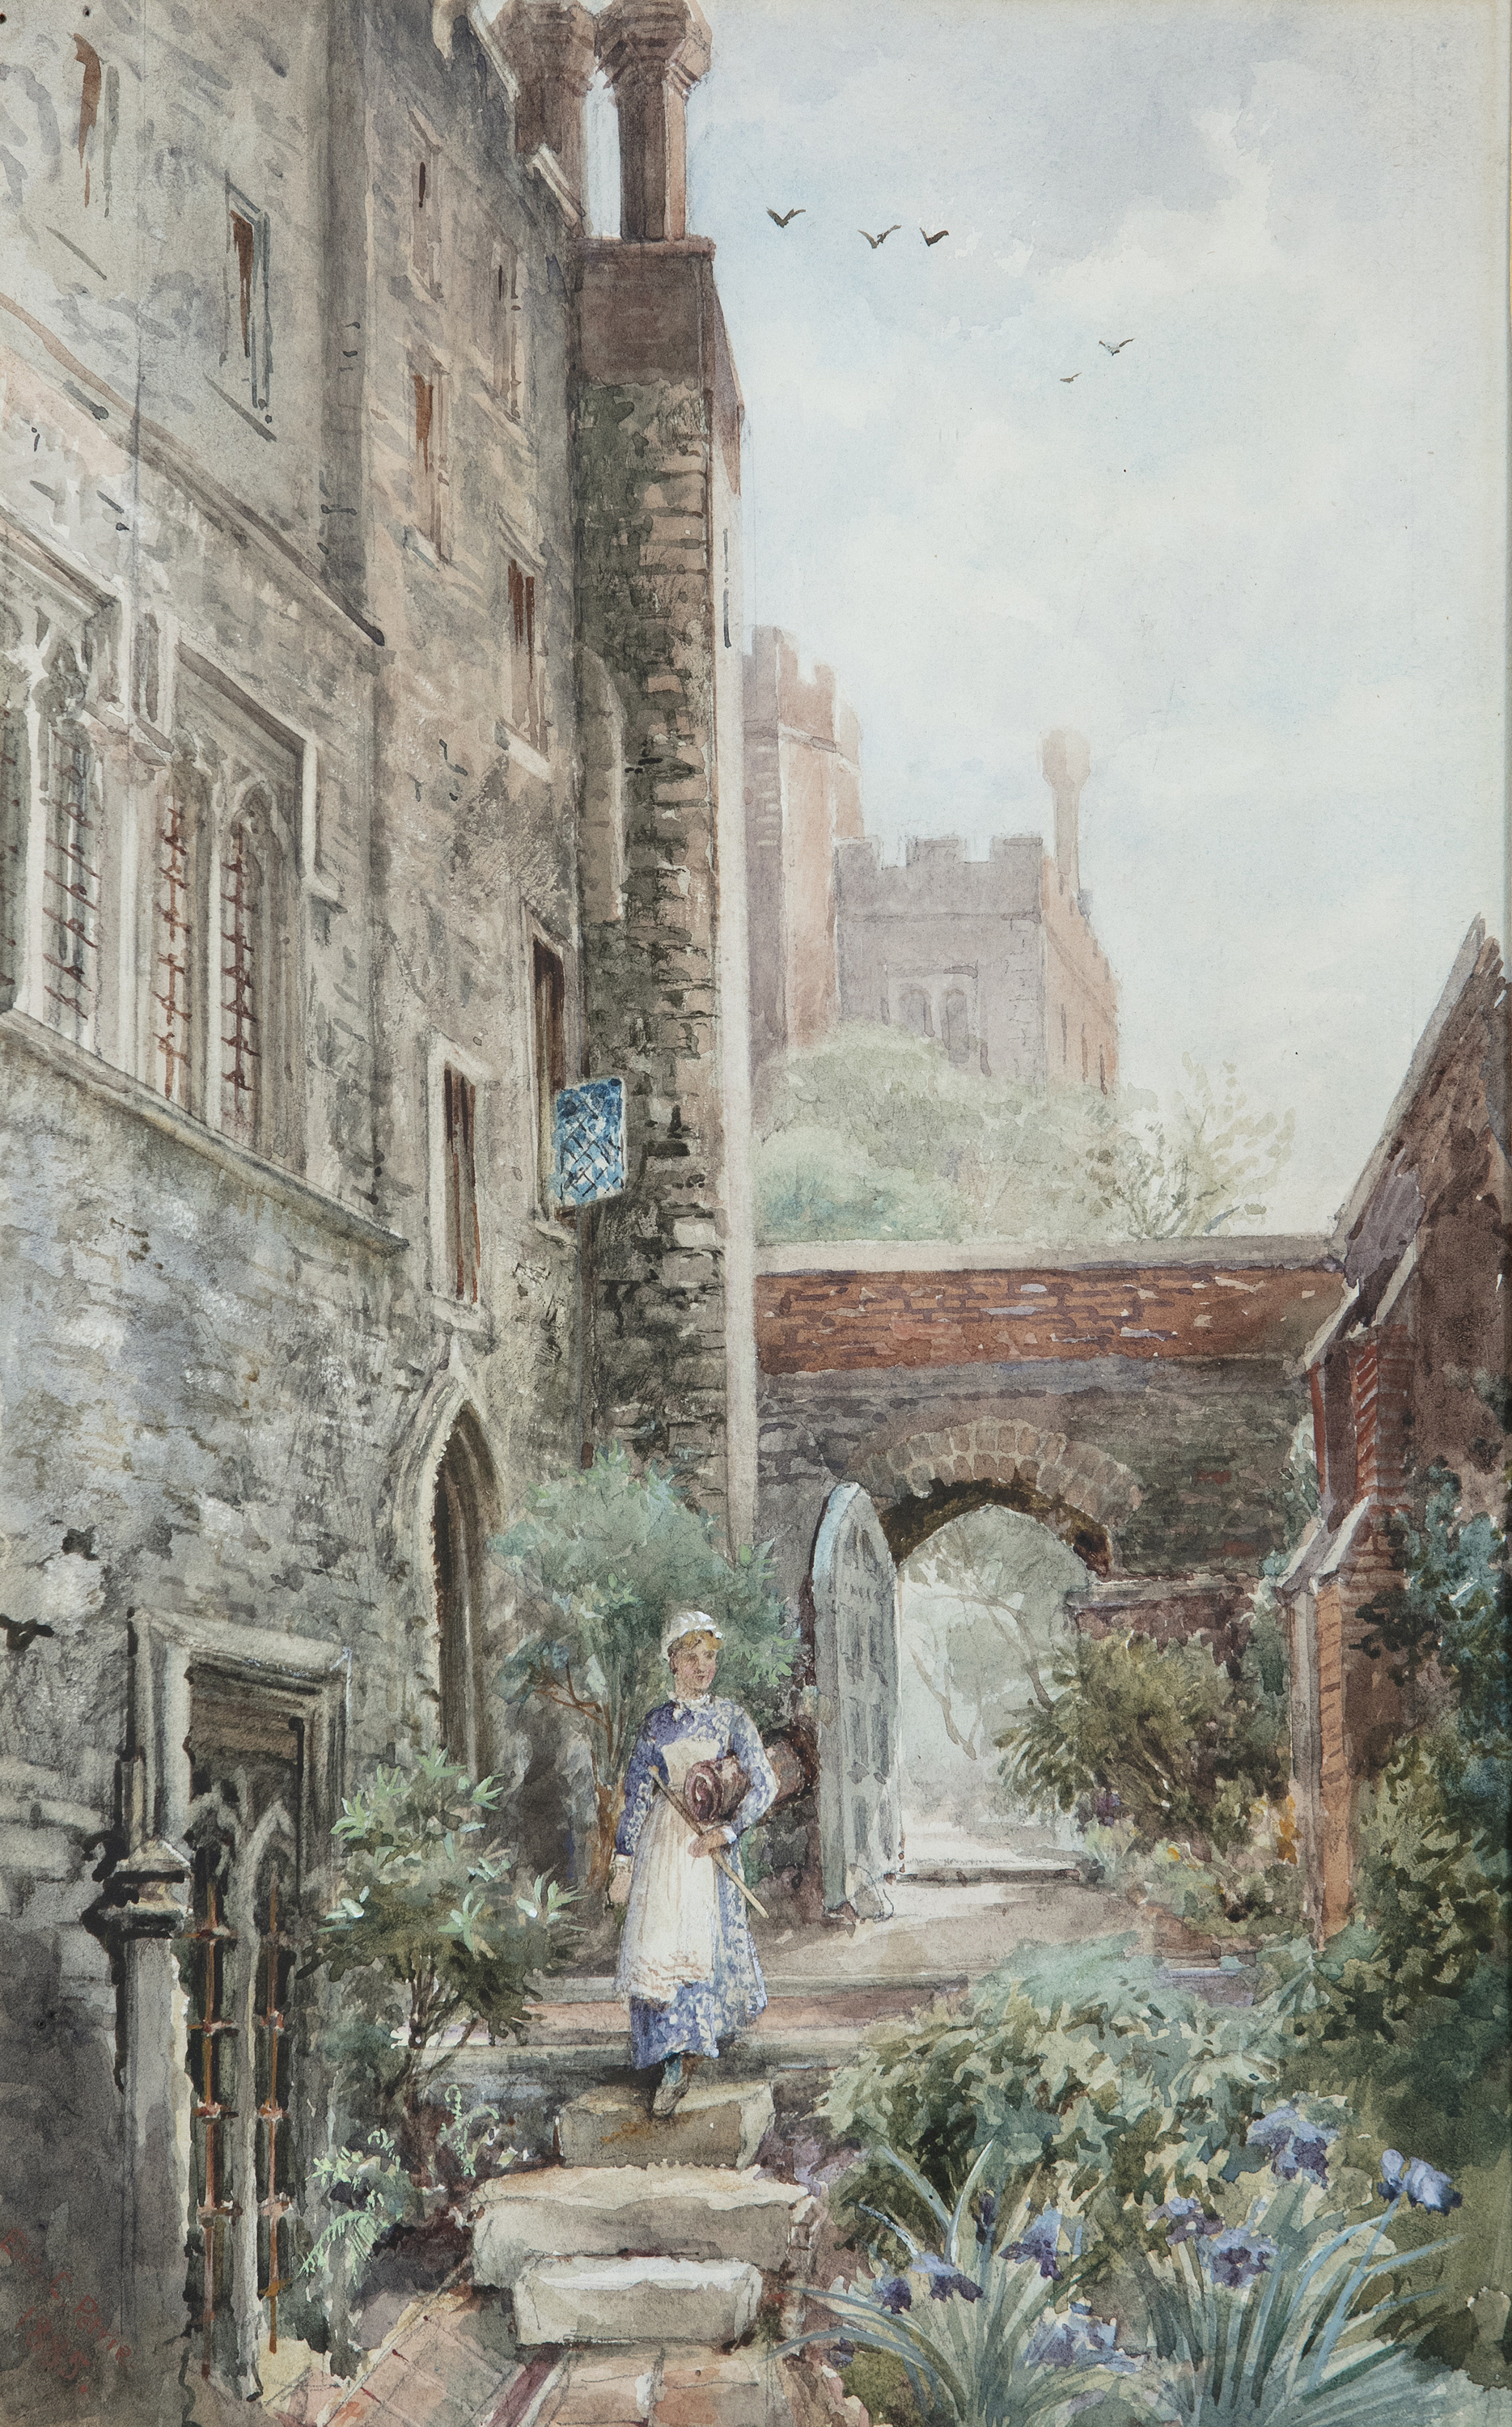 ELIZABETH C. PETRIE (19TH/20TH CENTURY) The Chevely Tower, Lambeth Palace Watercolour, 37 x 23cm